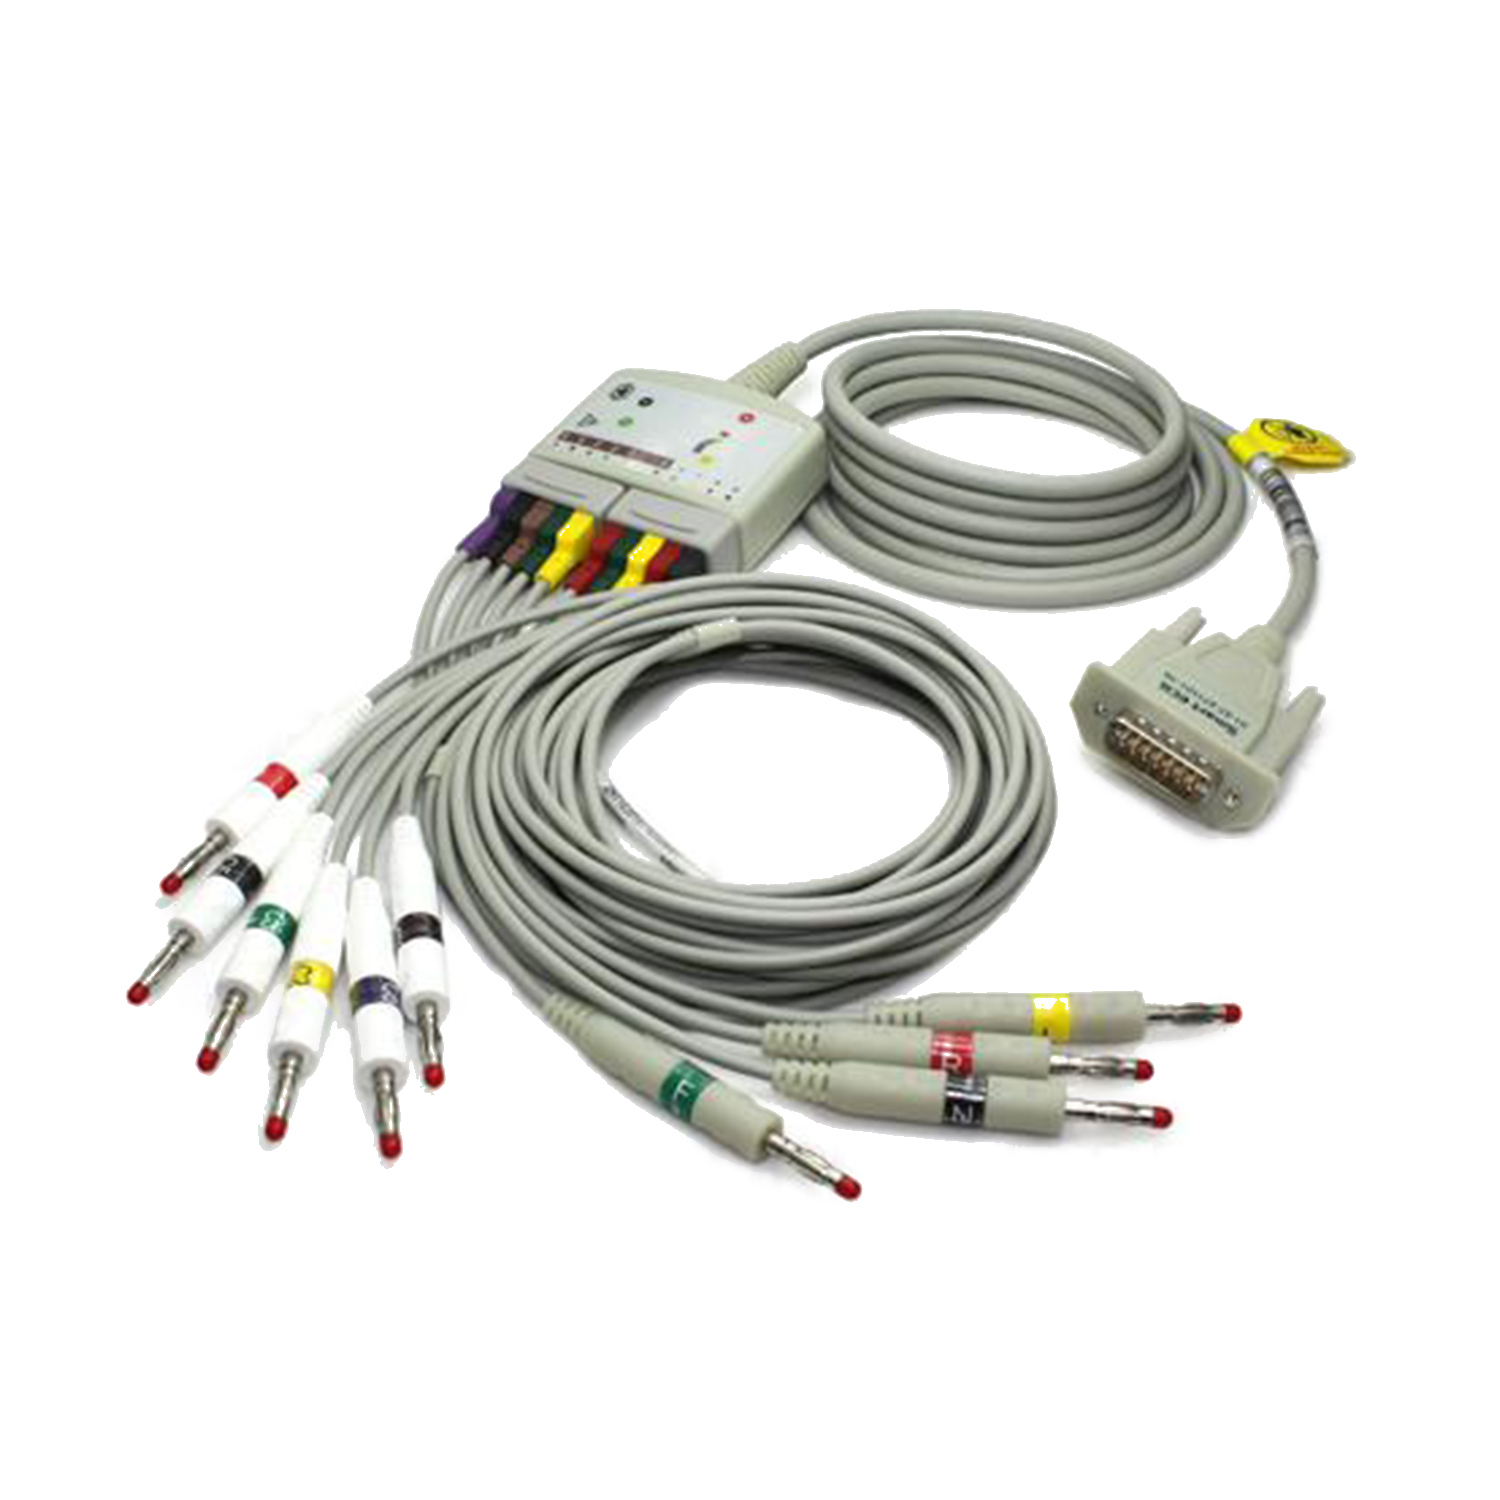 12 Lead ECG trunk Cable with Leadwires kit for Avante True ECG-1